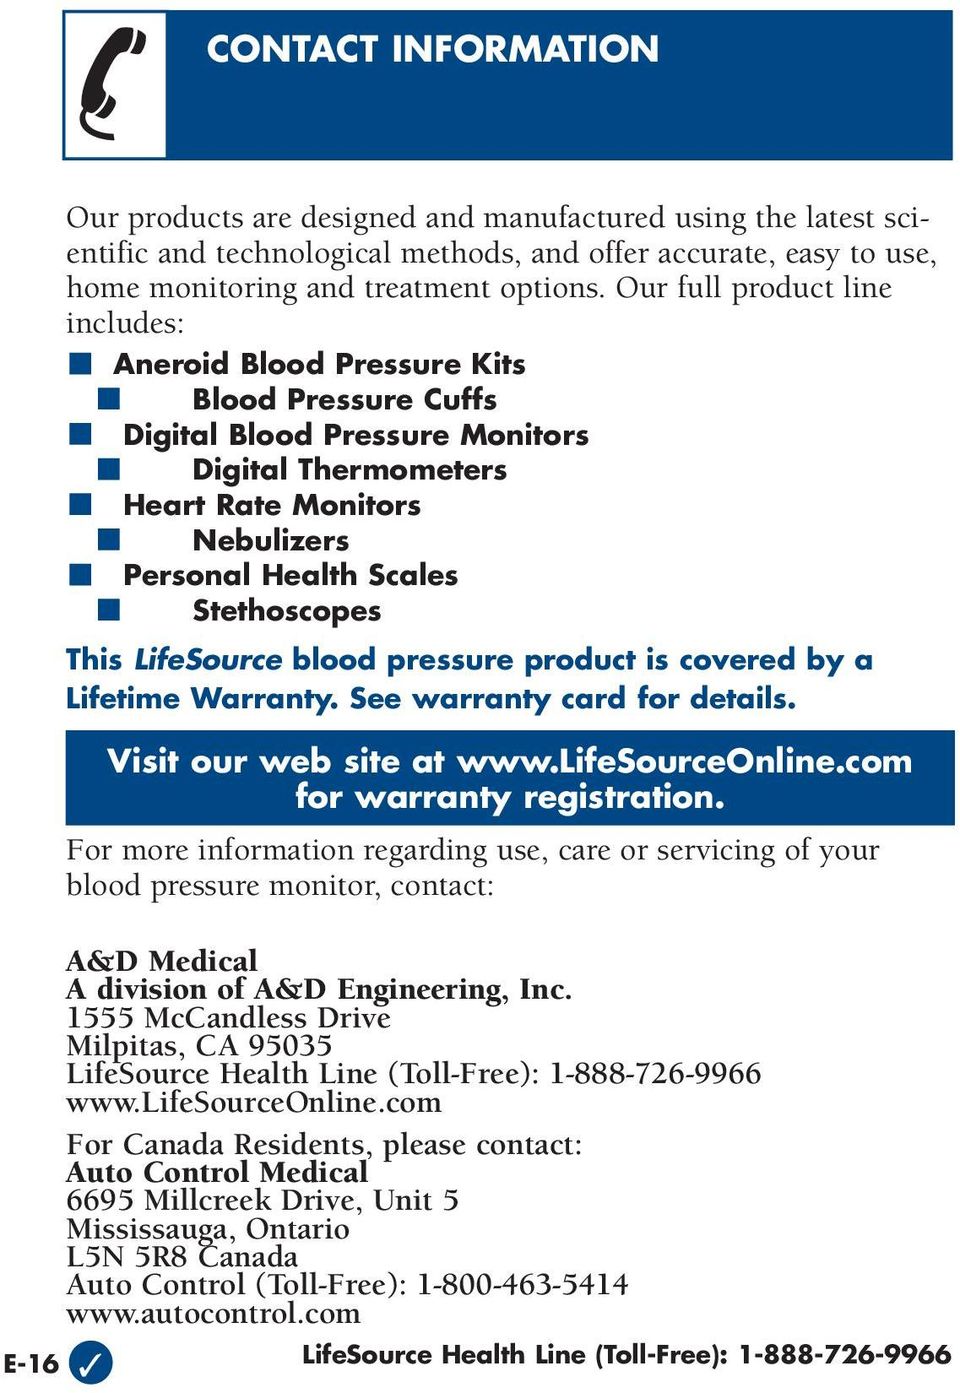 Stethoscopes This LifeSource blood pressure product is covered by a Lifetime Warranty. See warranty card for details. Visit our web site at www.lifesourceonline.com for warranty registration.